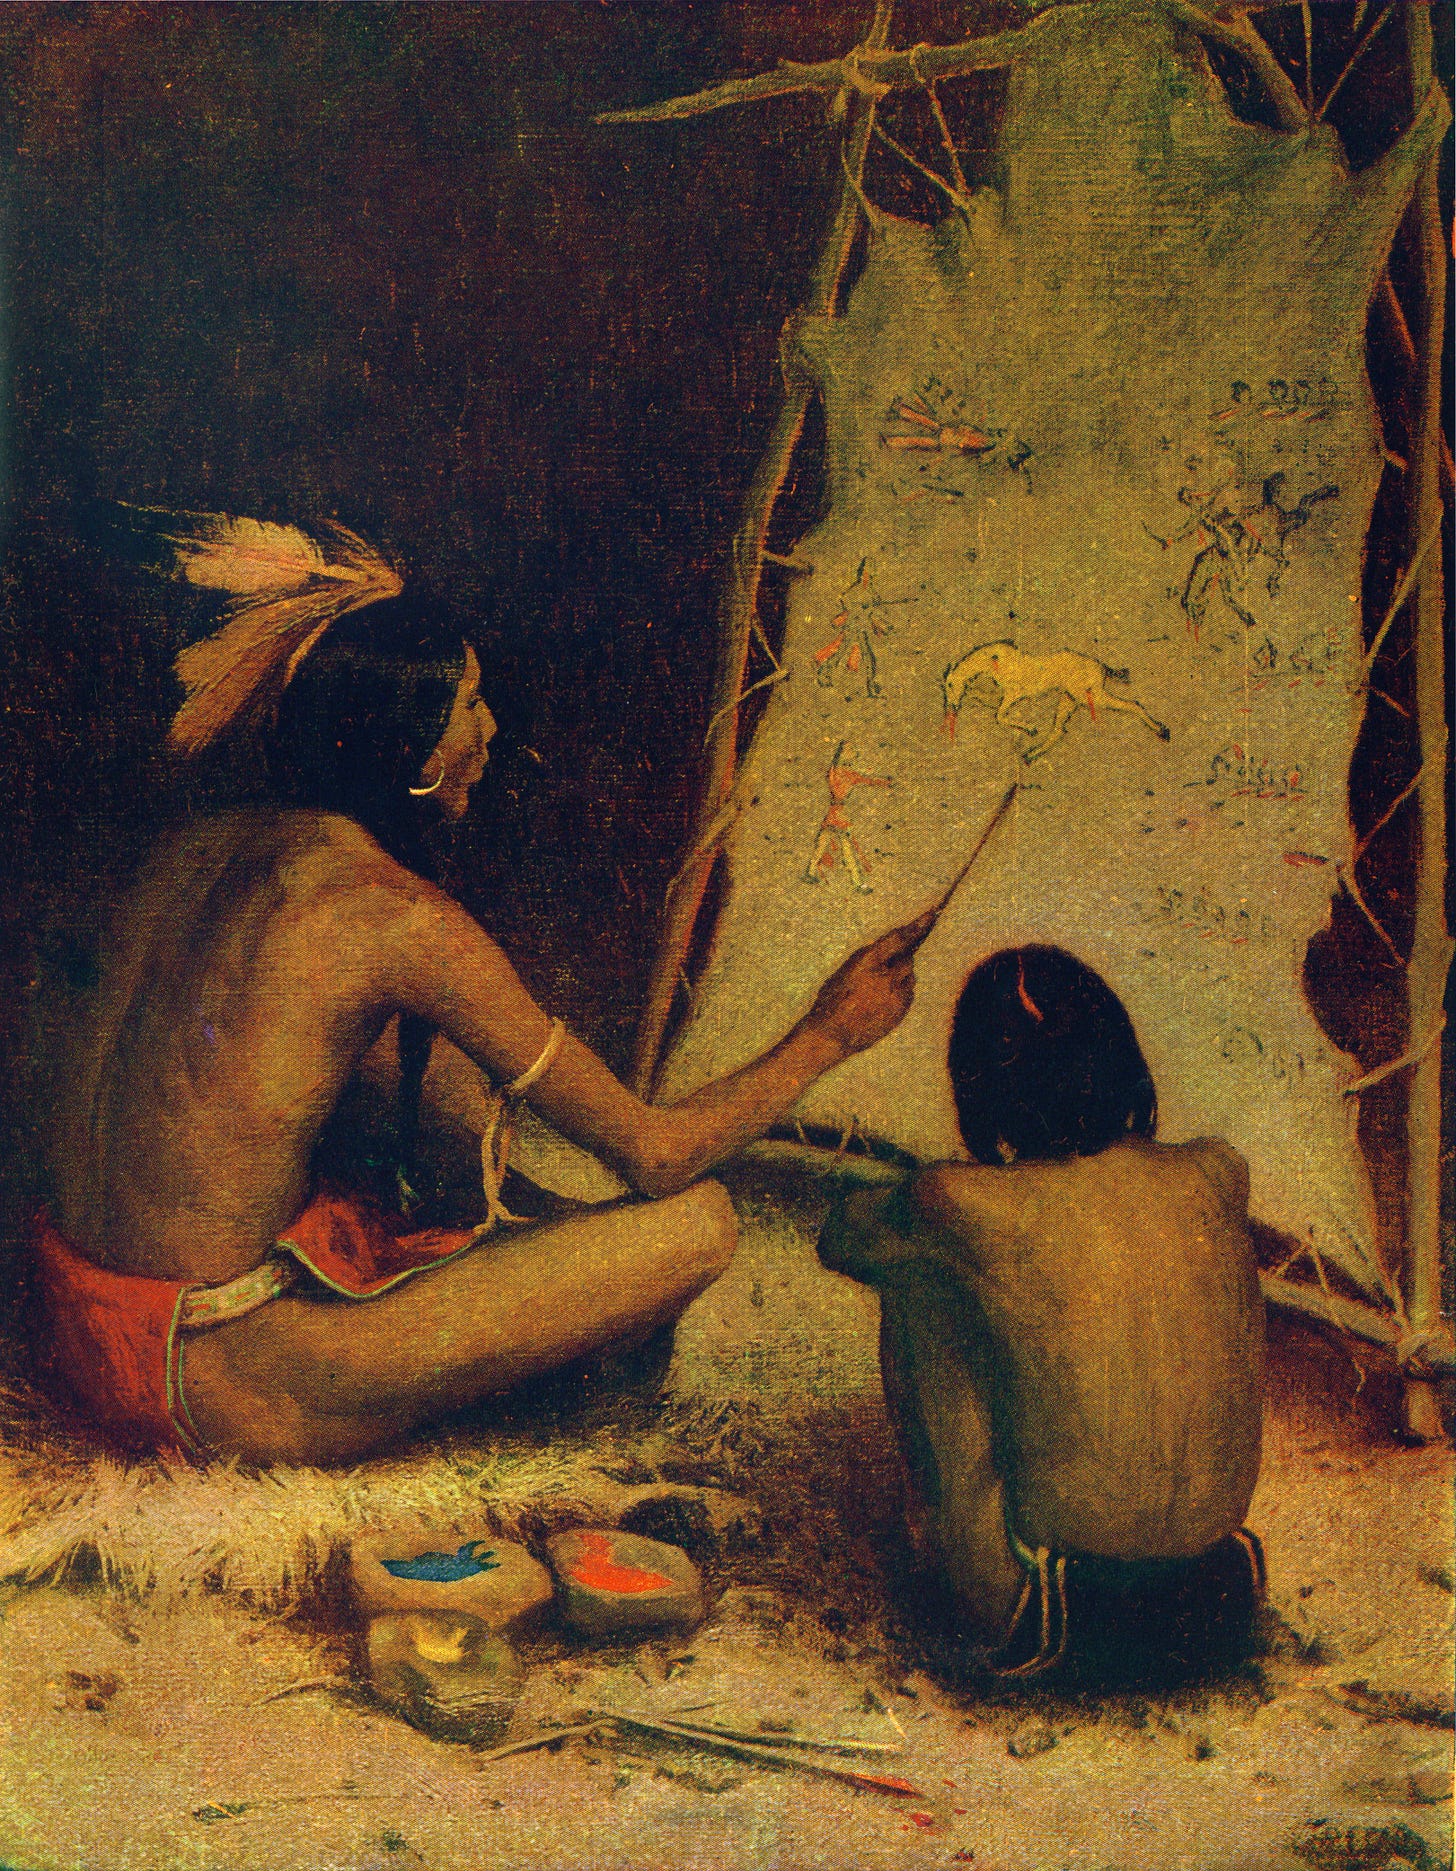 Child development of the indigenous peoples of the Americas - Wikipedia